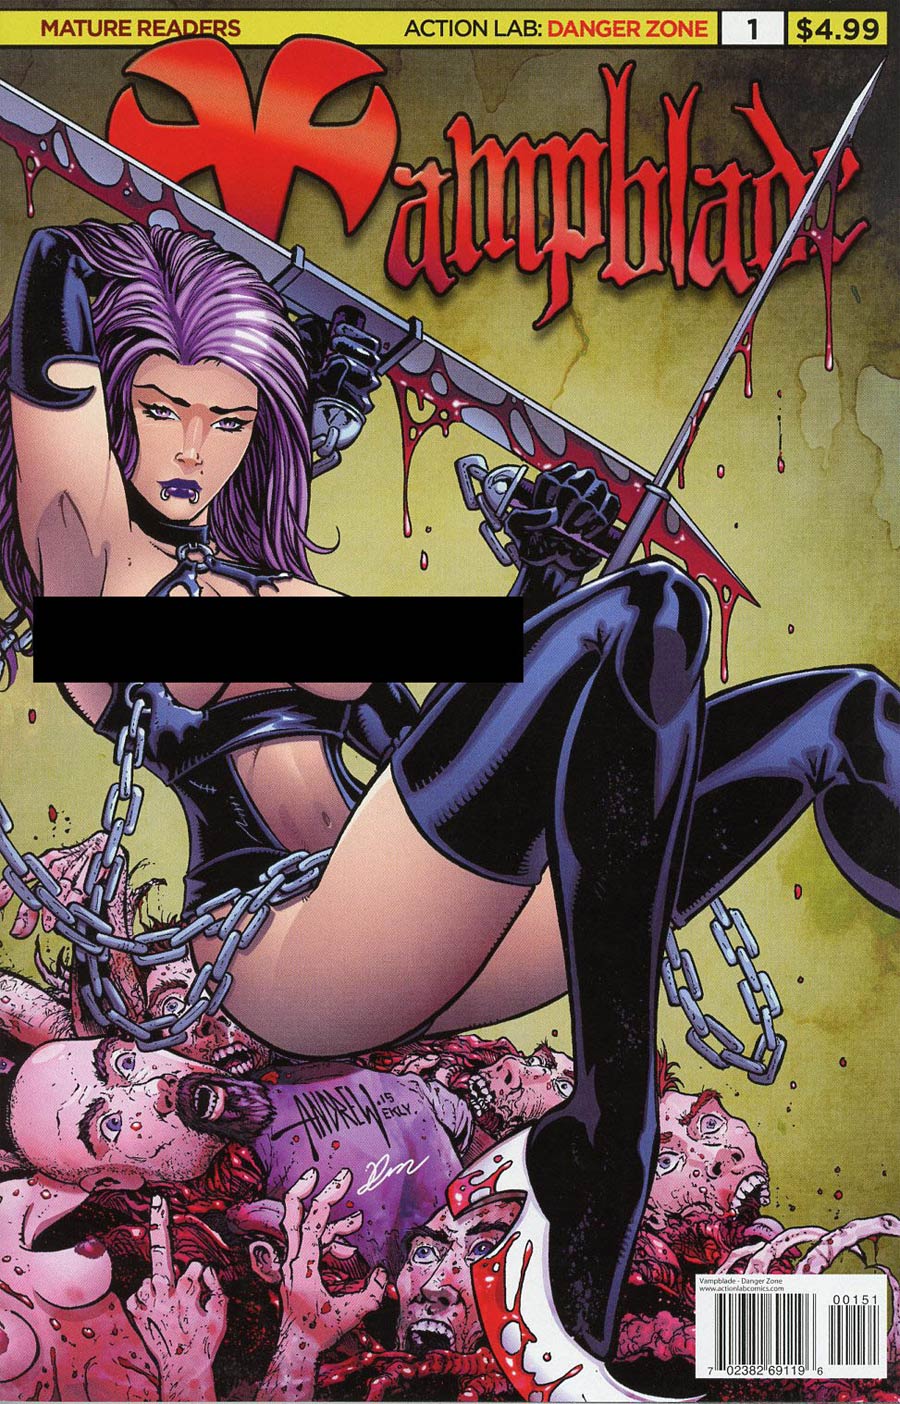 Vampblade #1 Cover E Variant Andrew Mangum 90s Cheesecake Risque Color Cover